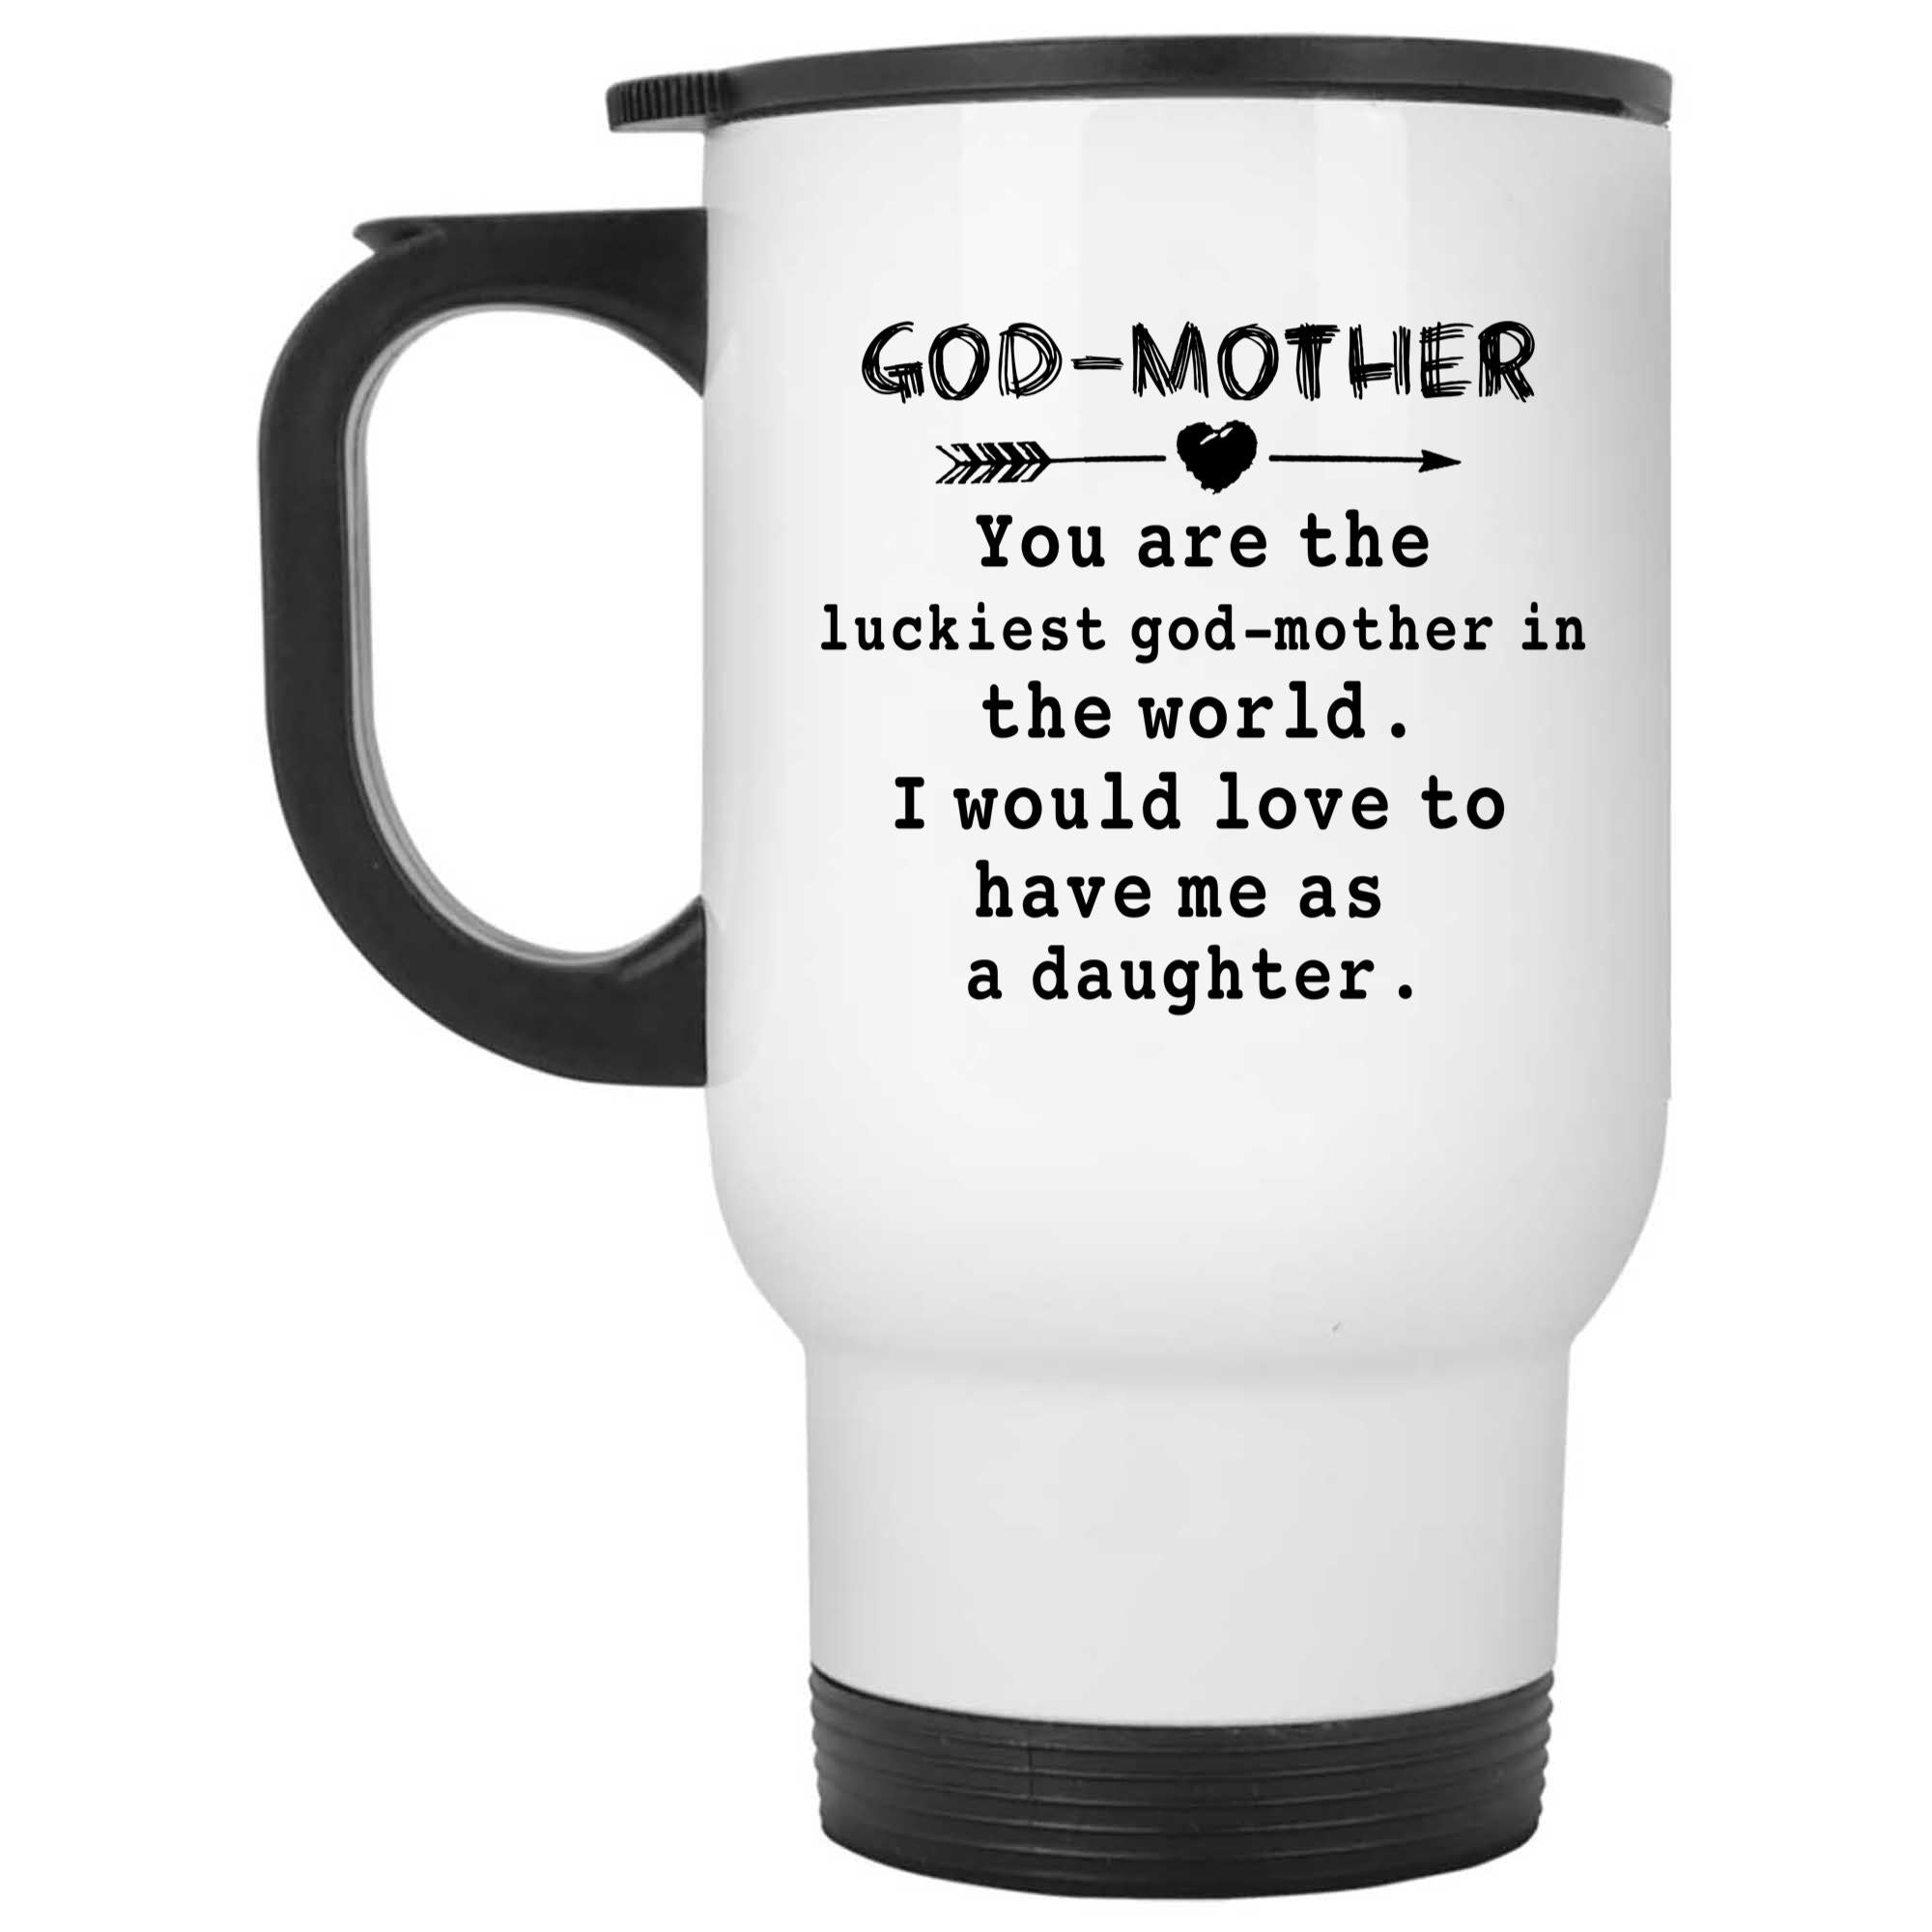 Skitongifts Funny Ceramic Novelty Coffee Mug You're The Luckiest God-Mother In The World. I Would Love To Have Me As A Daughter Mothers Day Gifts